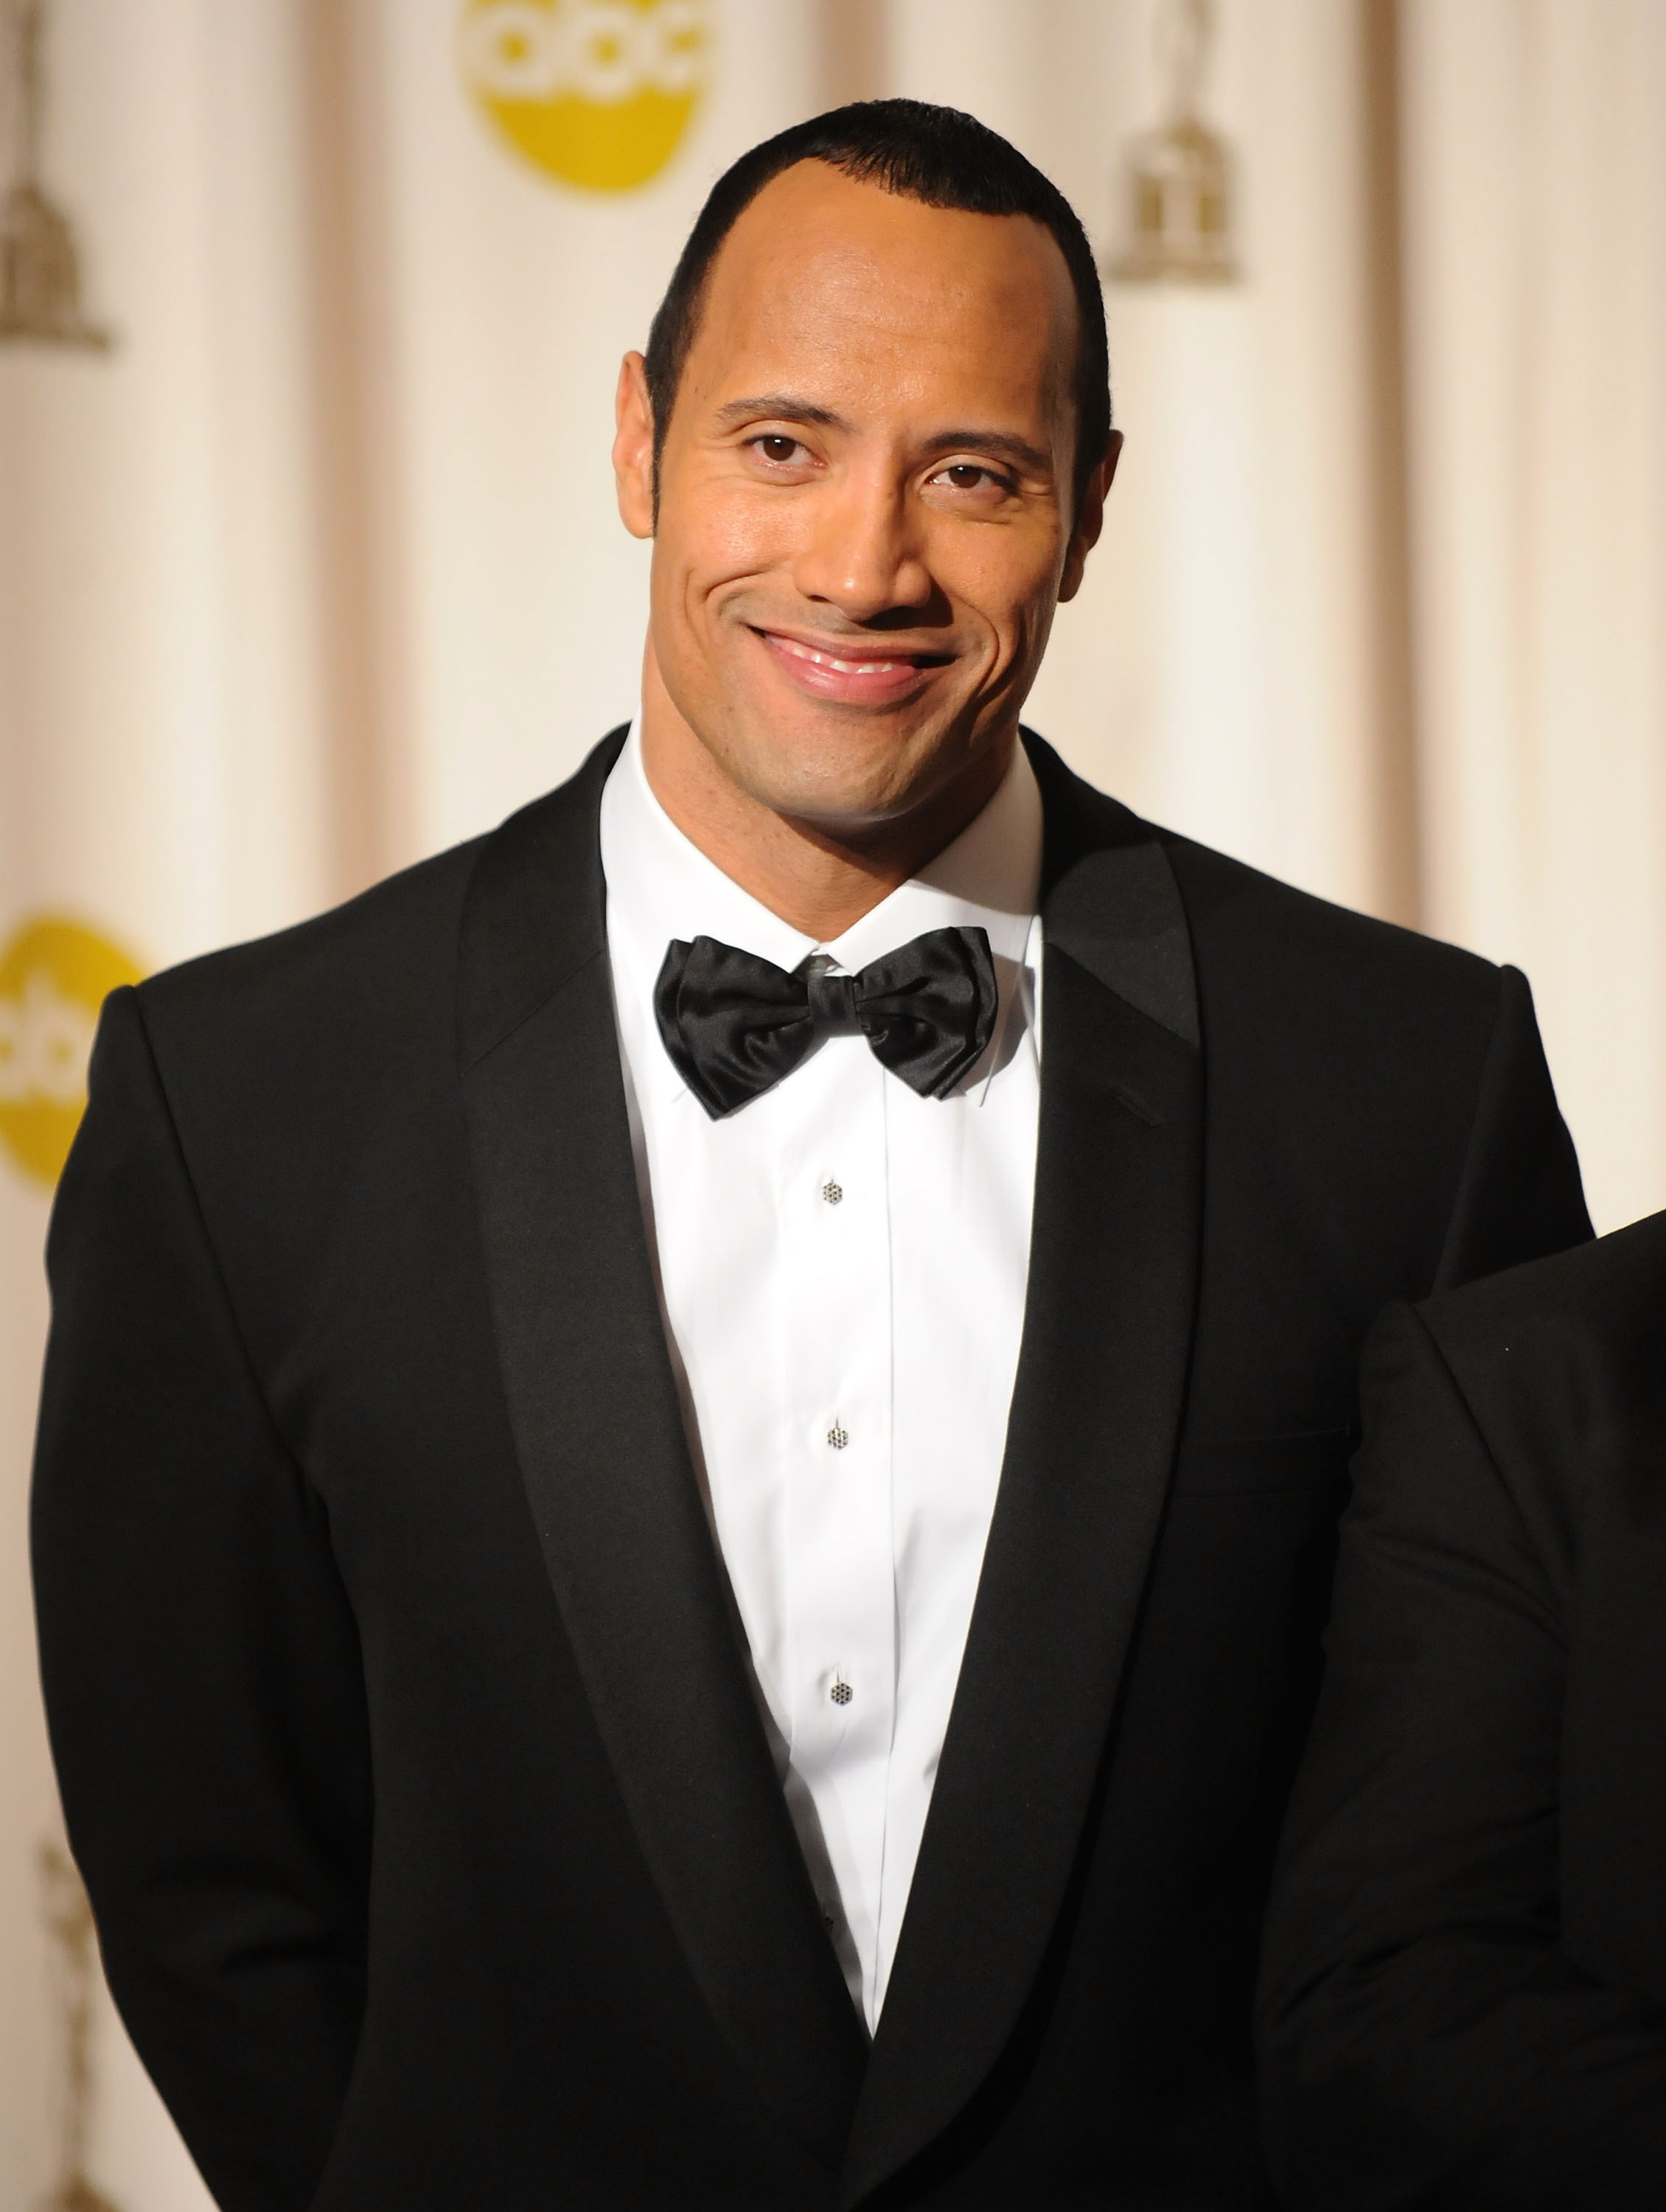 Dwayne smiling in a suit and bow tie at a media event